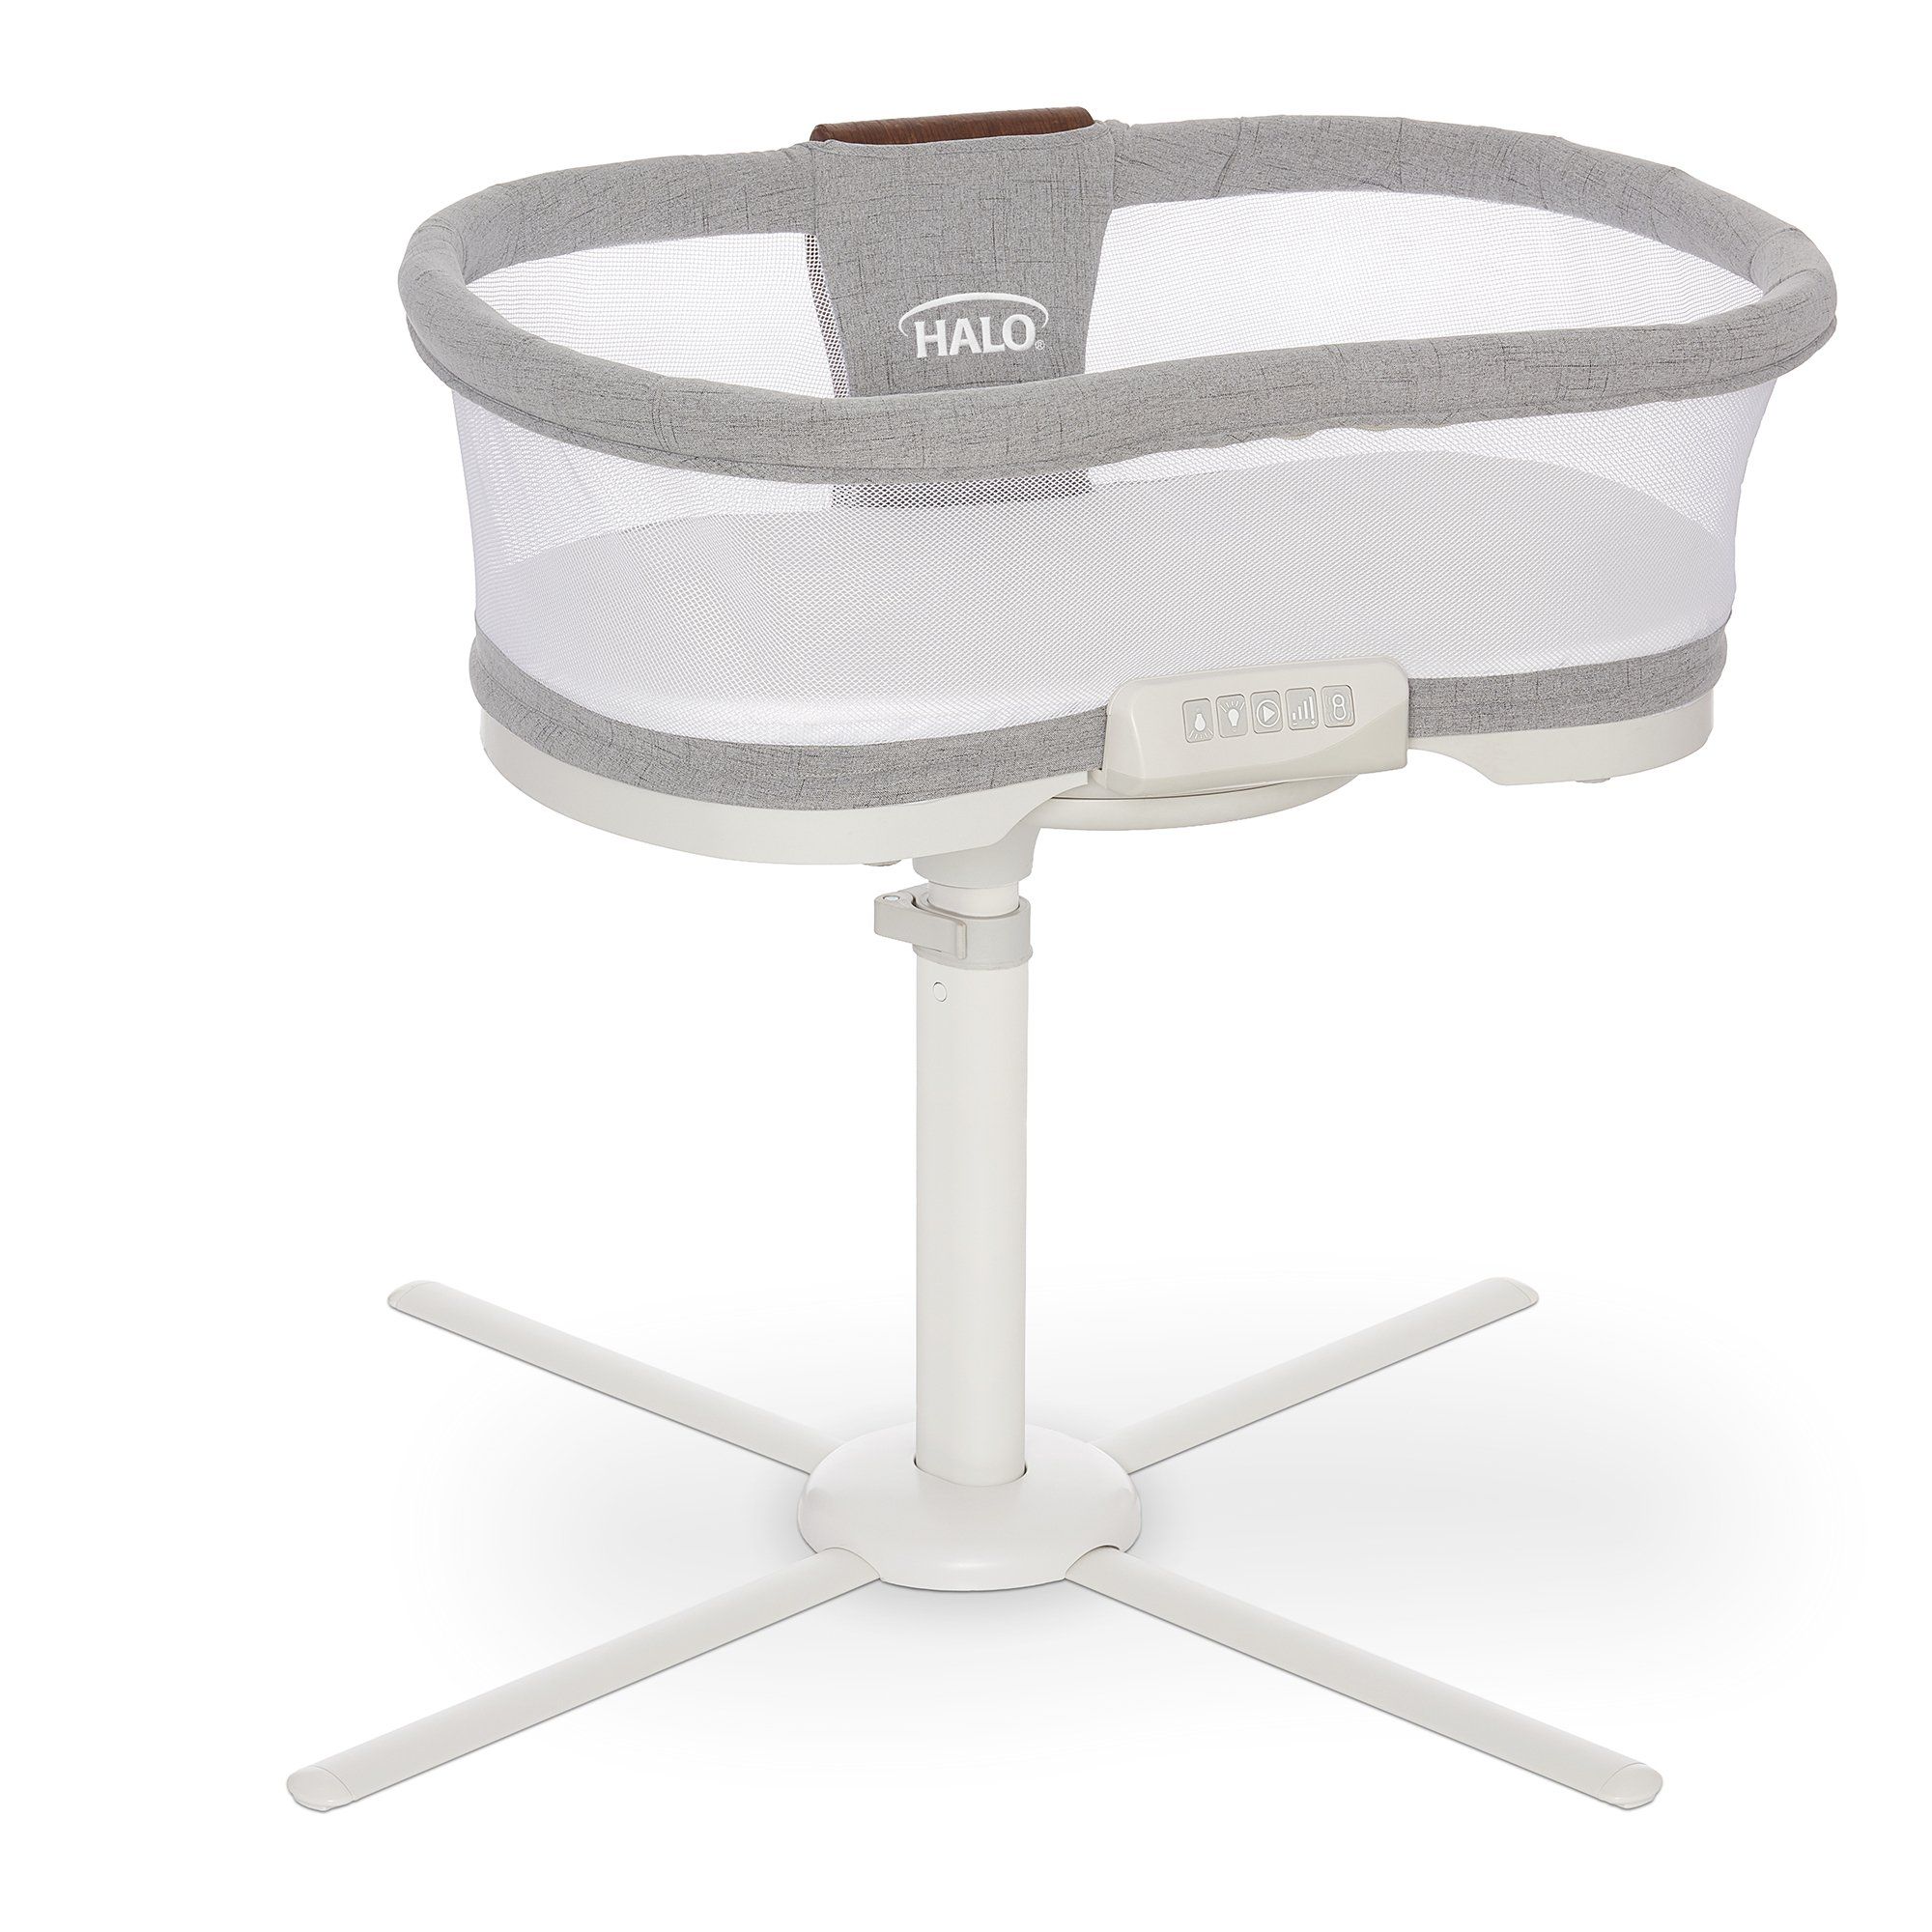 HALO Bassinest Luxe Series Vibrating Adjustable Bassinet - Dove Gray Tweed